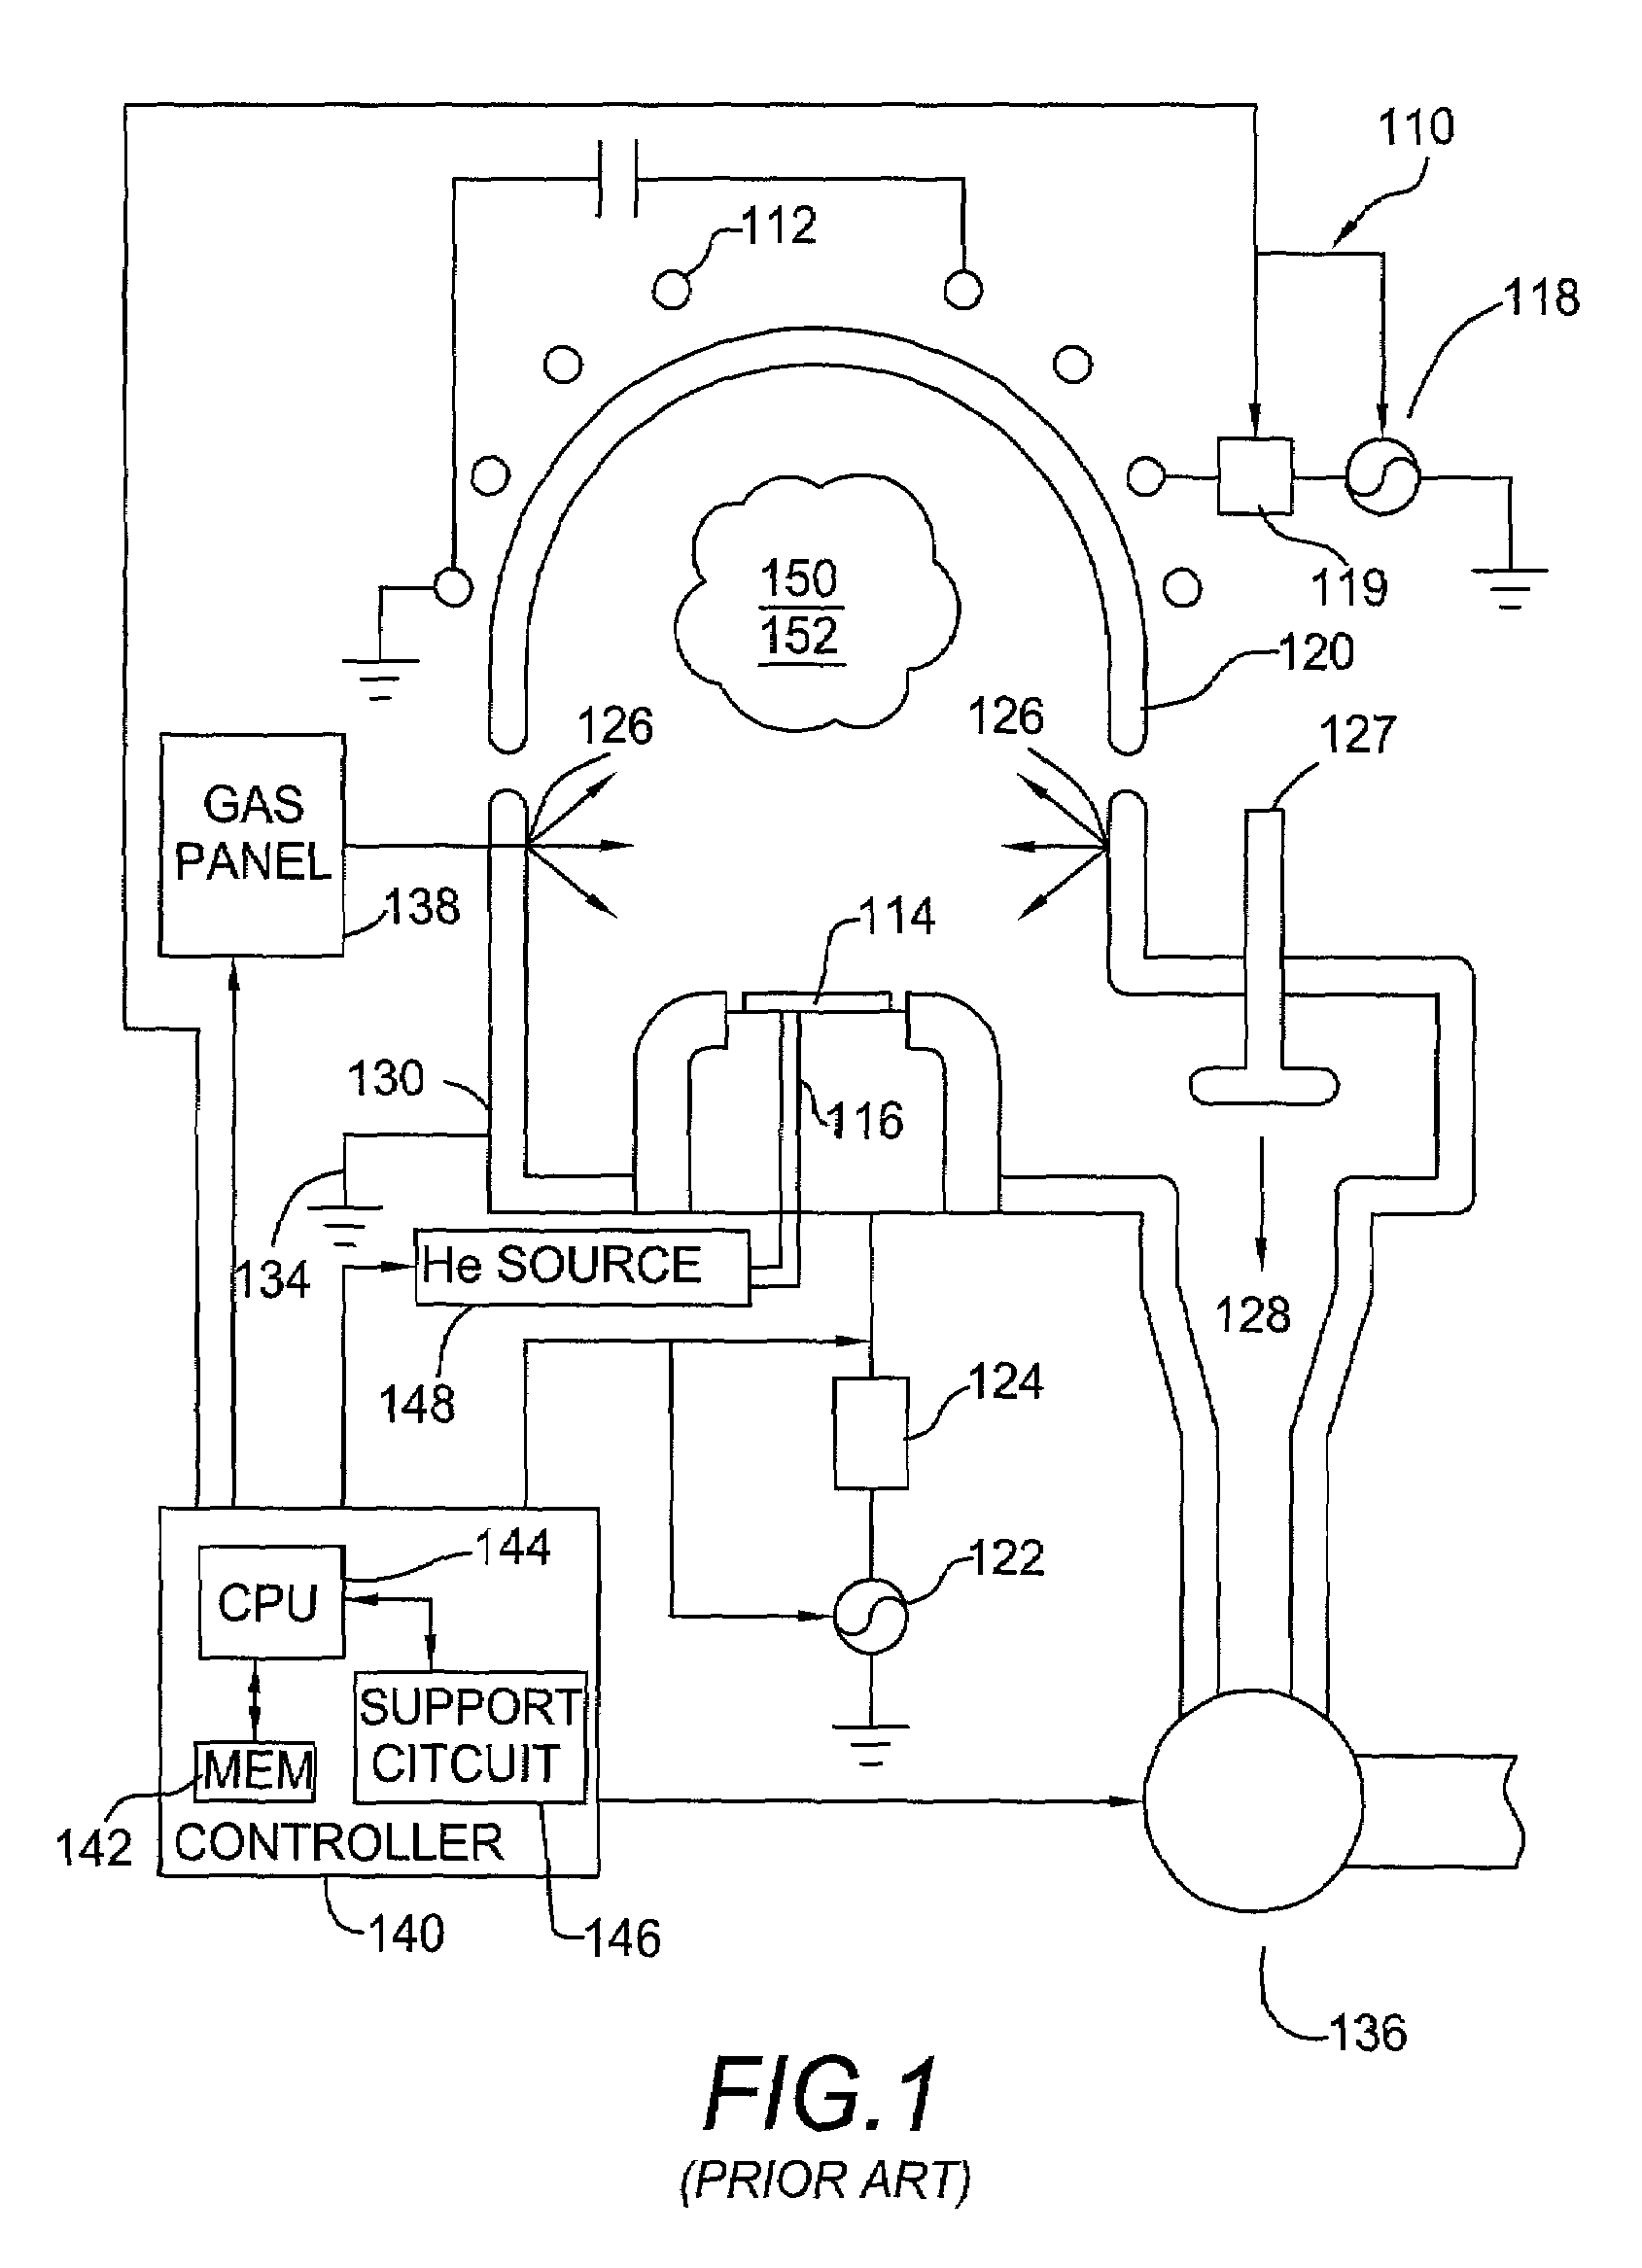 Method of plasma etching of high-K dielectric materials